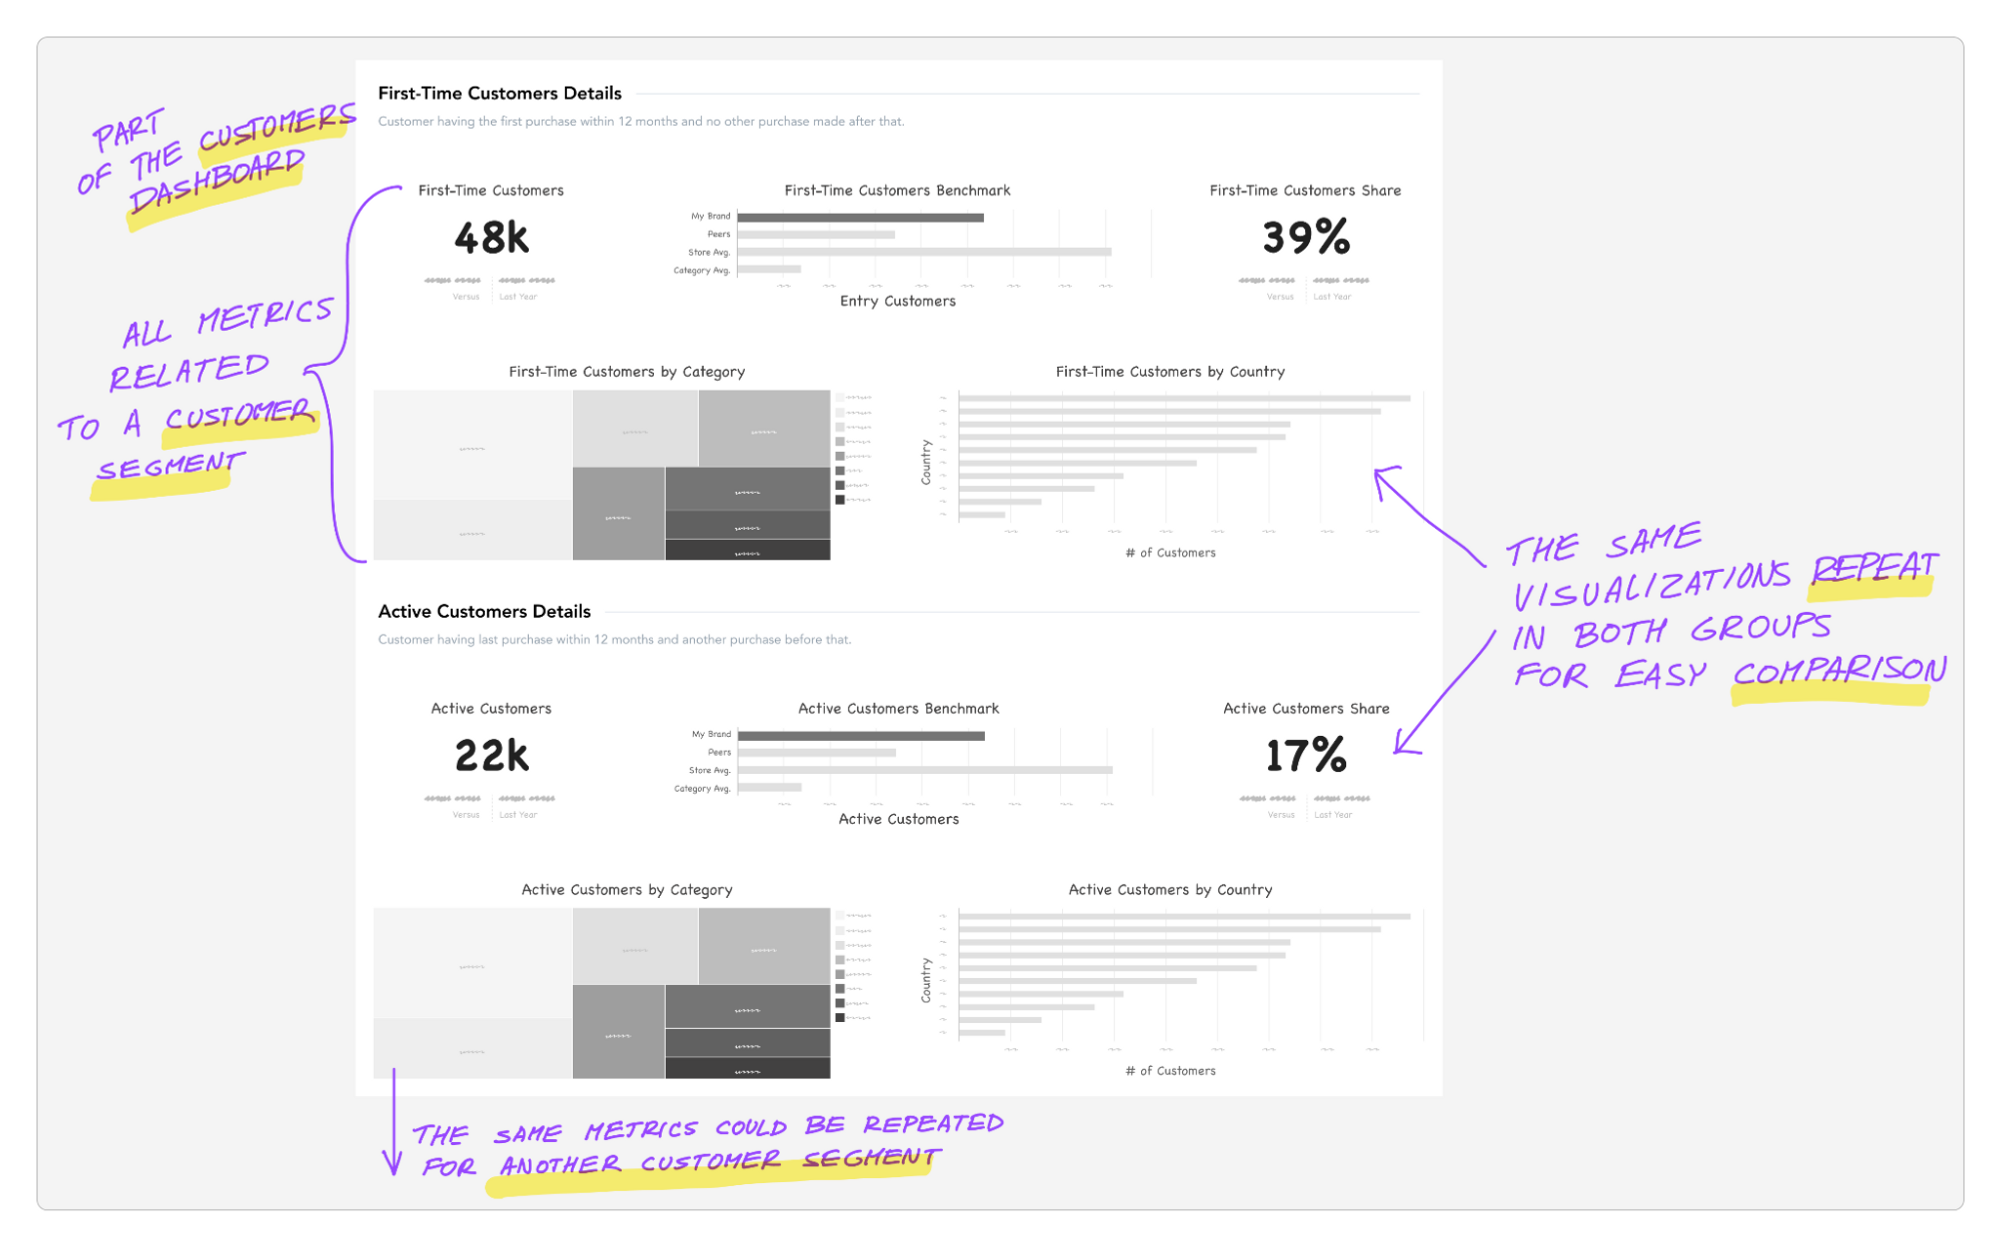 Grouping of metrics allows users to compare, for example, different customer segments.